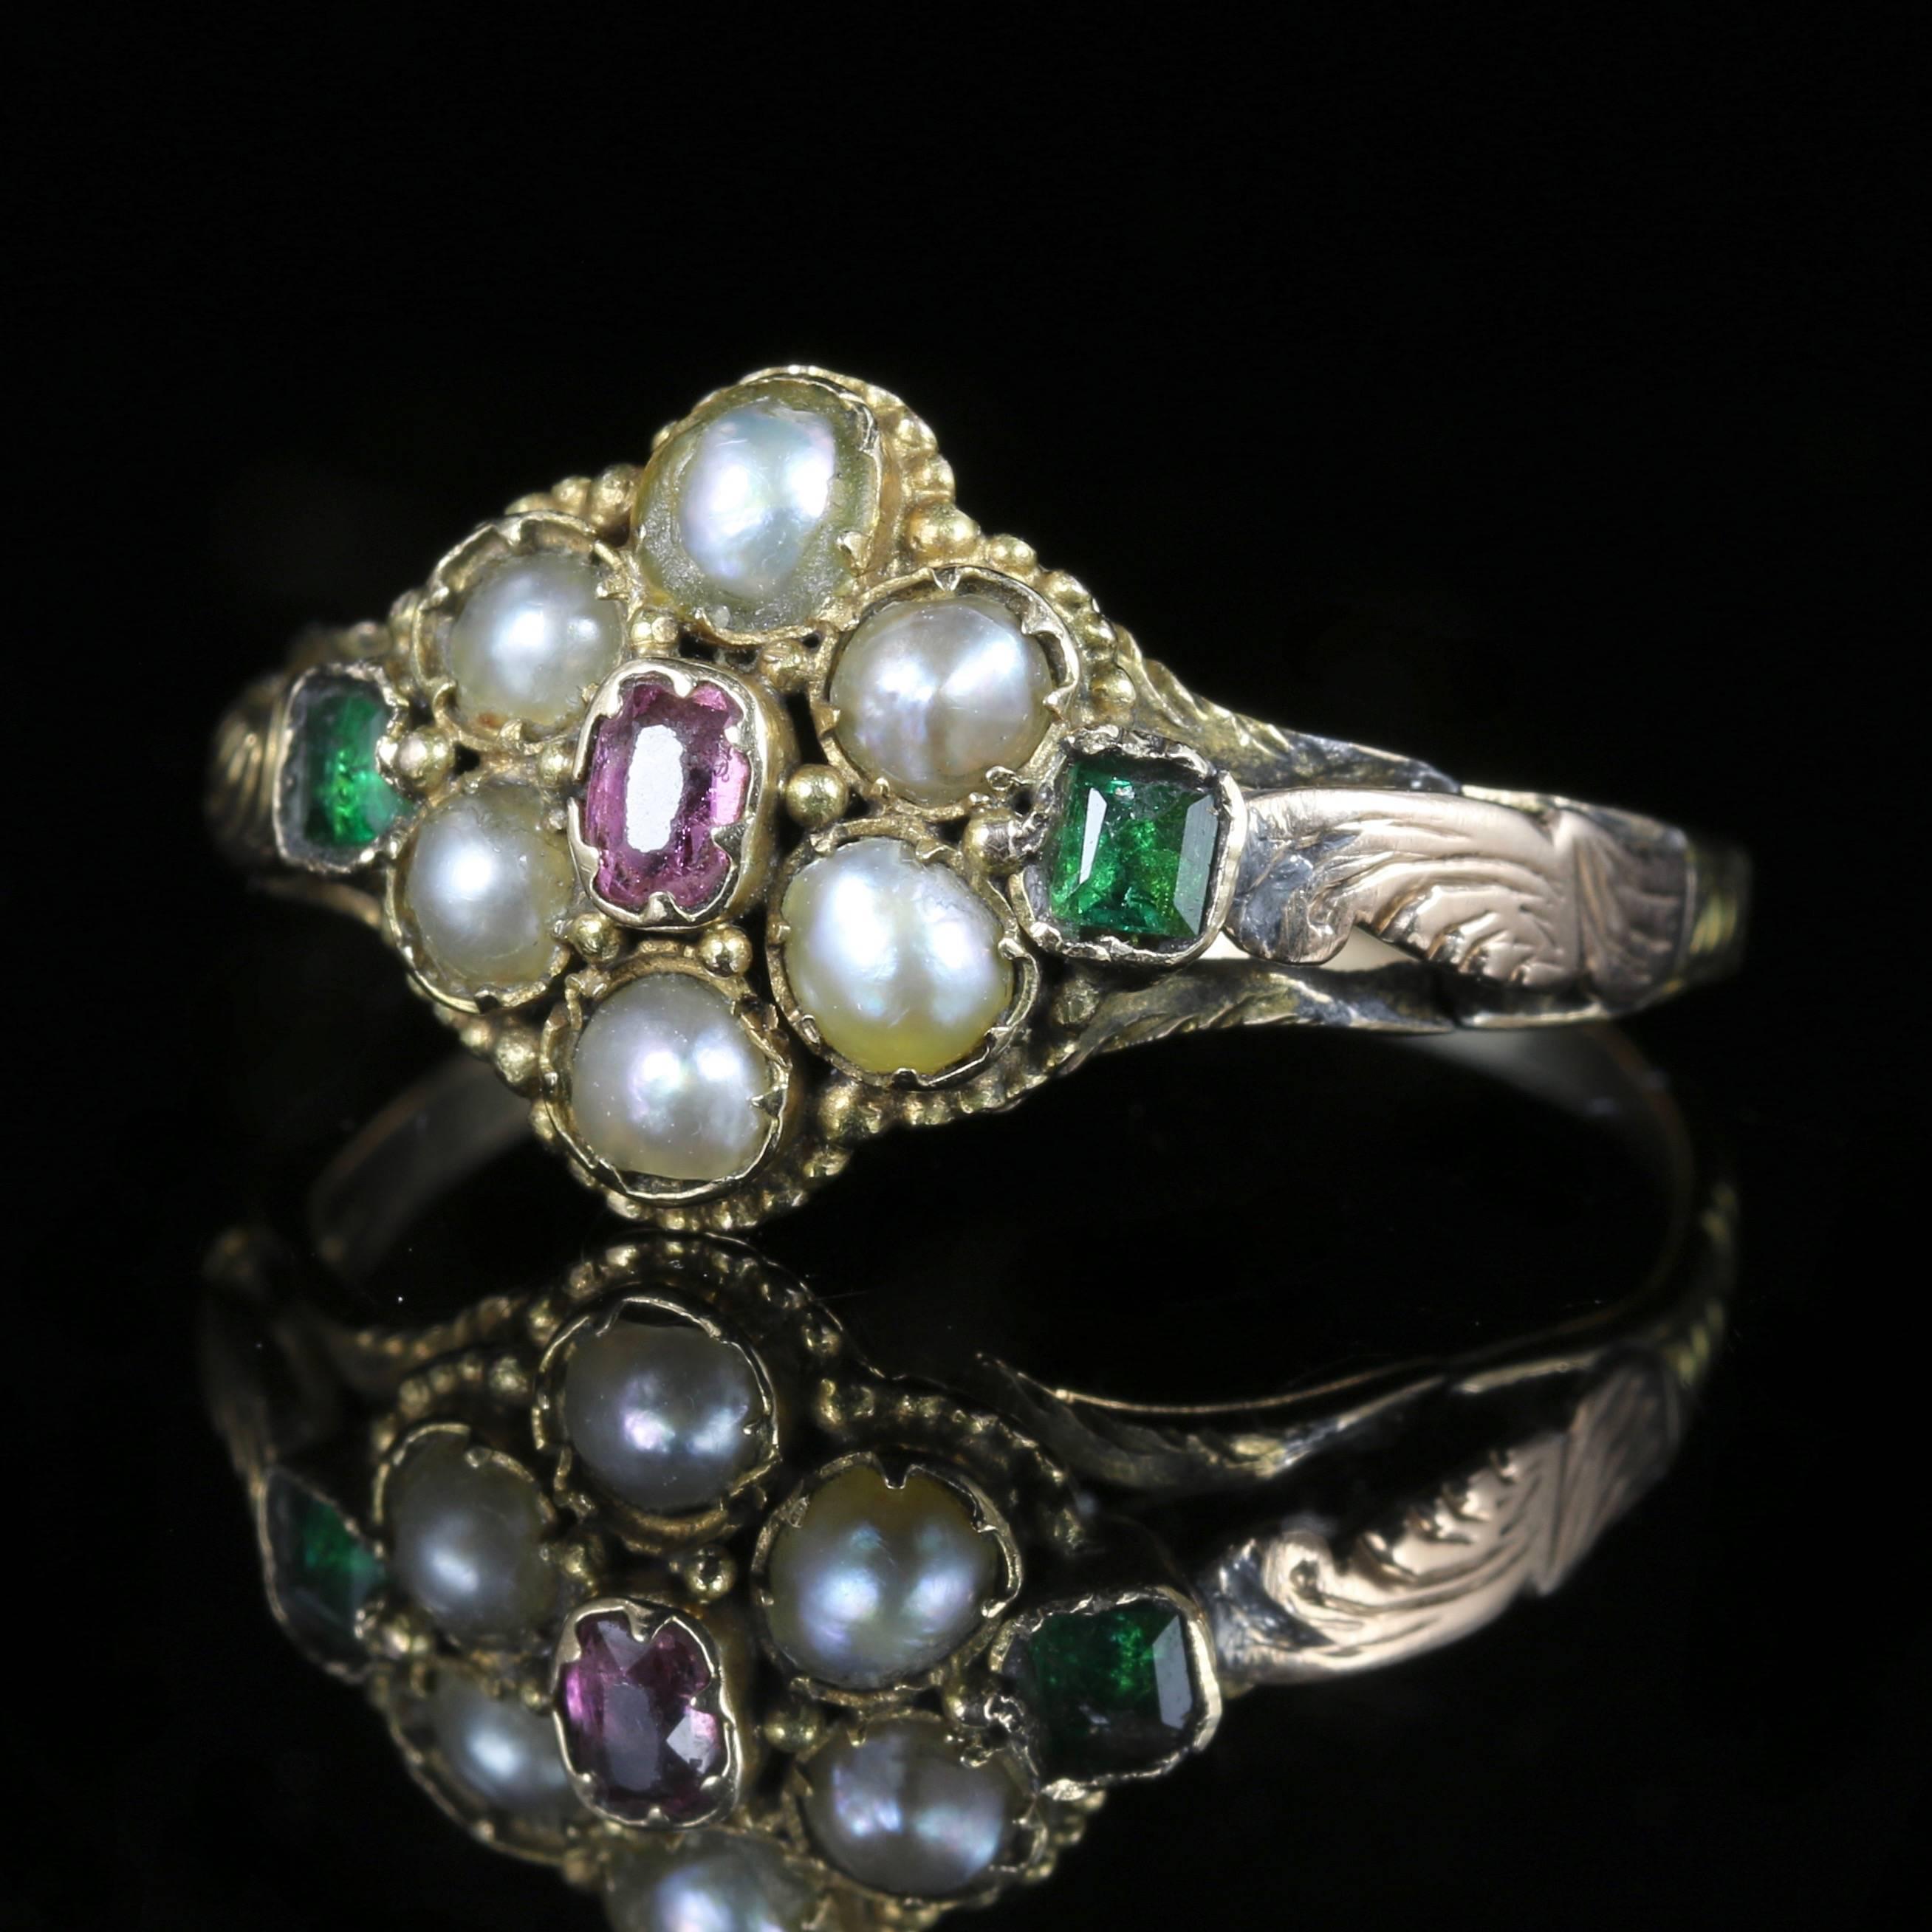 This is a stunning Georgian 18ct yellow Gold Antique ring, Circa 1800. Set with fabulous Georgian workmanship of its time, all original to the gallery and shank.

The central stone is an almandine Garnet, surrounded by Pearls and Emeralds.

This is